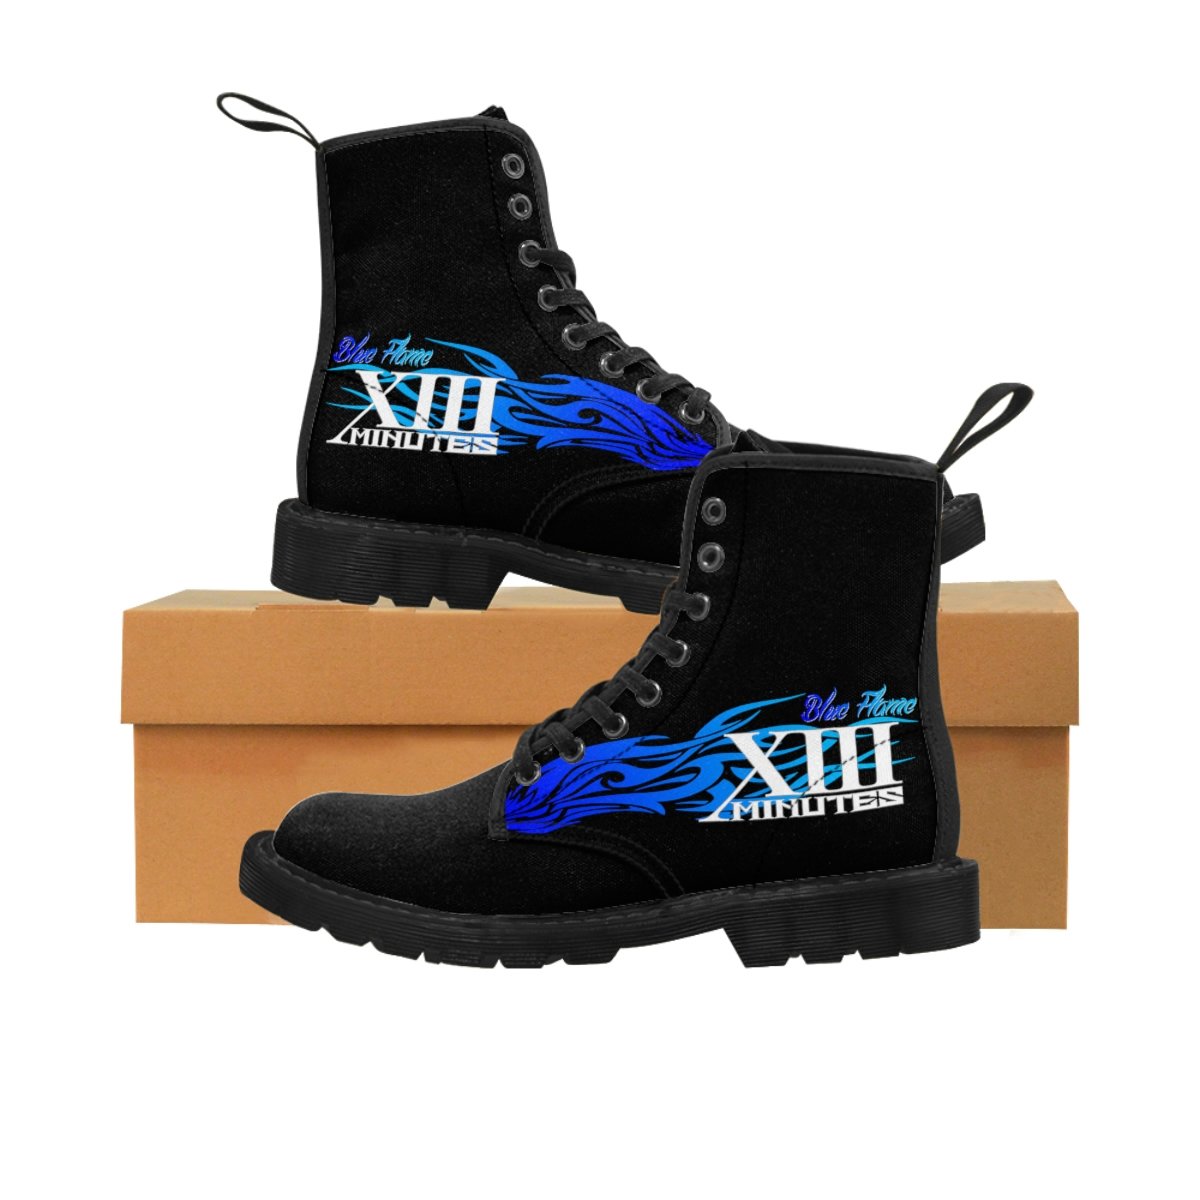 XIII Minutes Blue Flame Men’s Boots